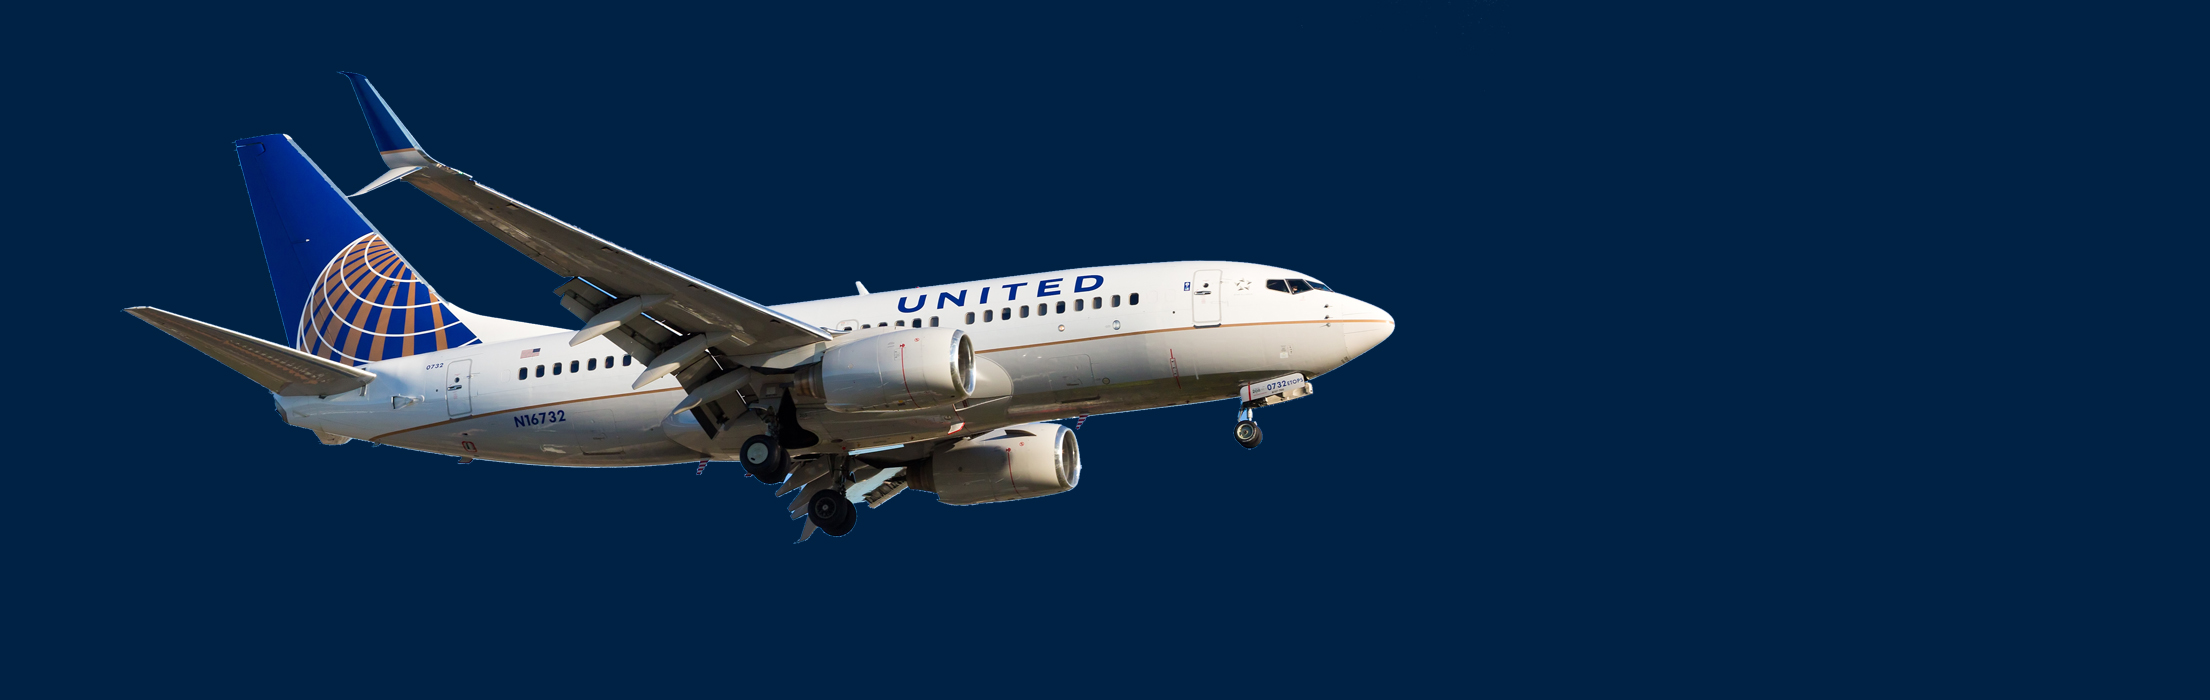 united airlines flight customer service phone number